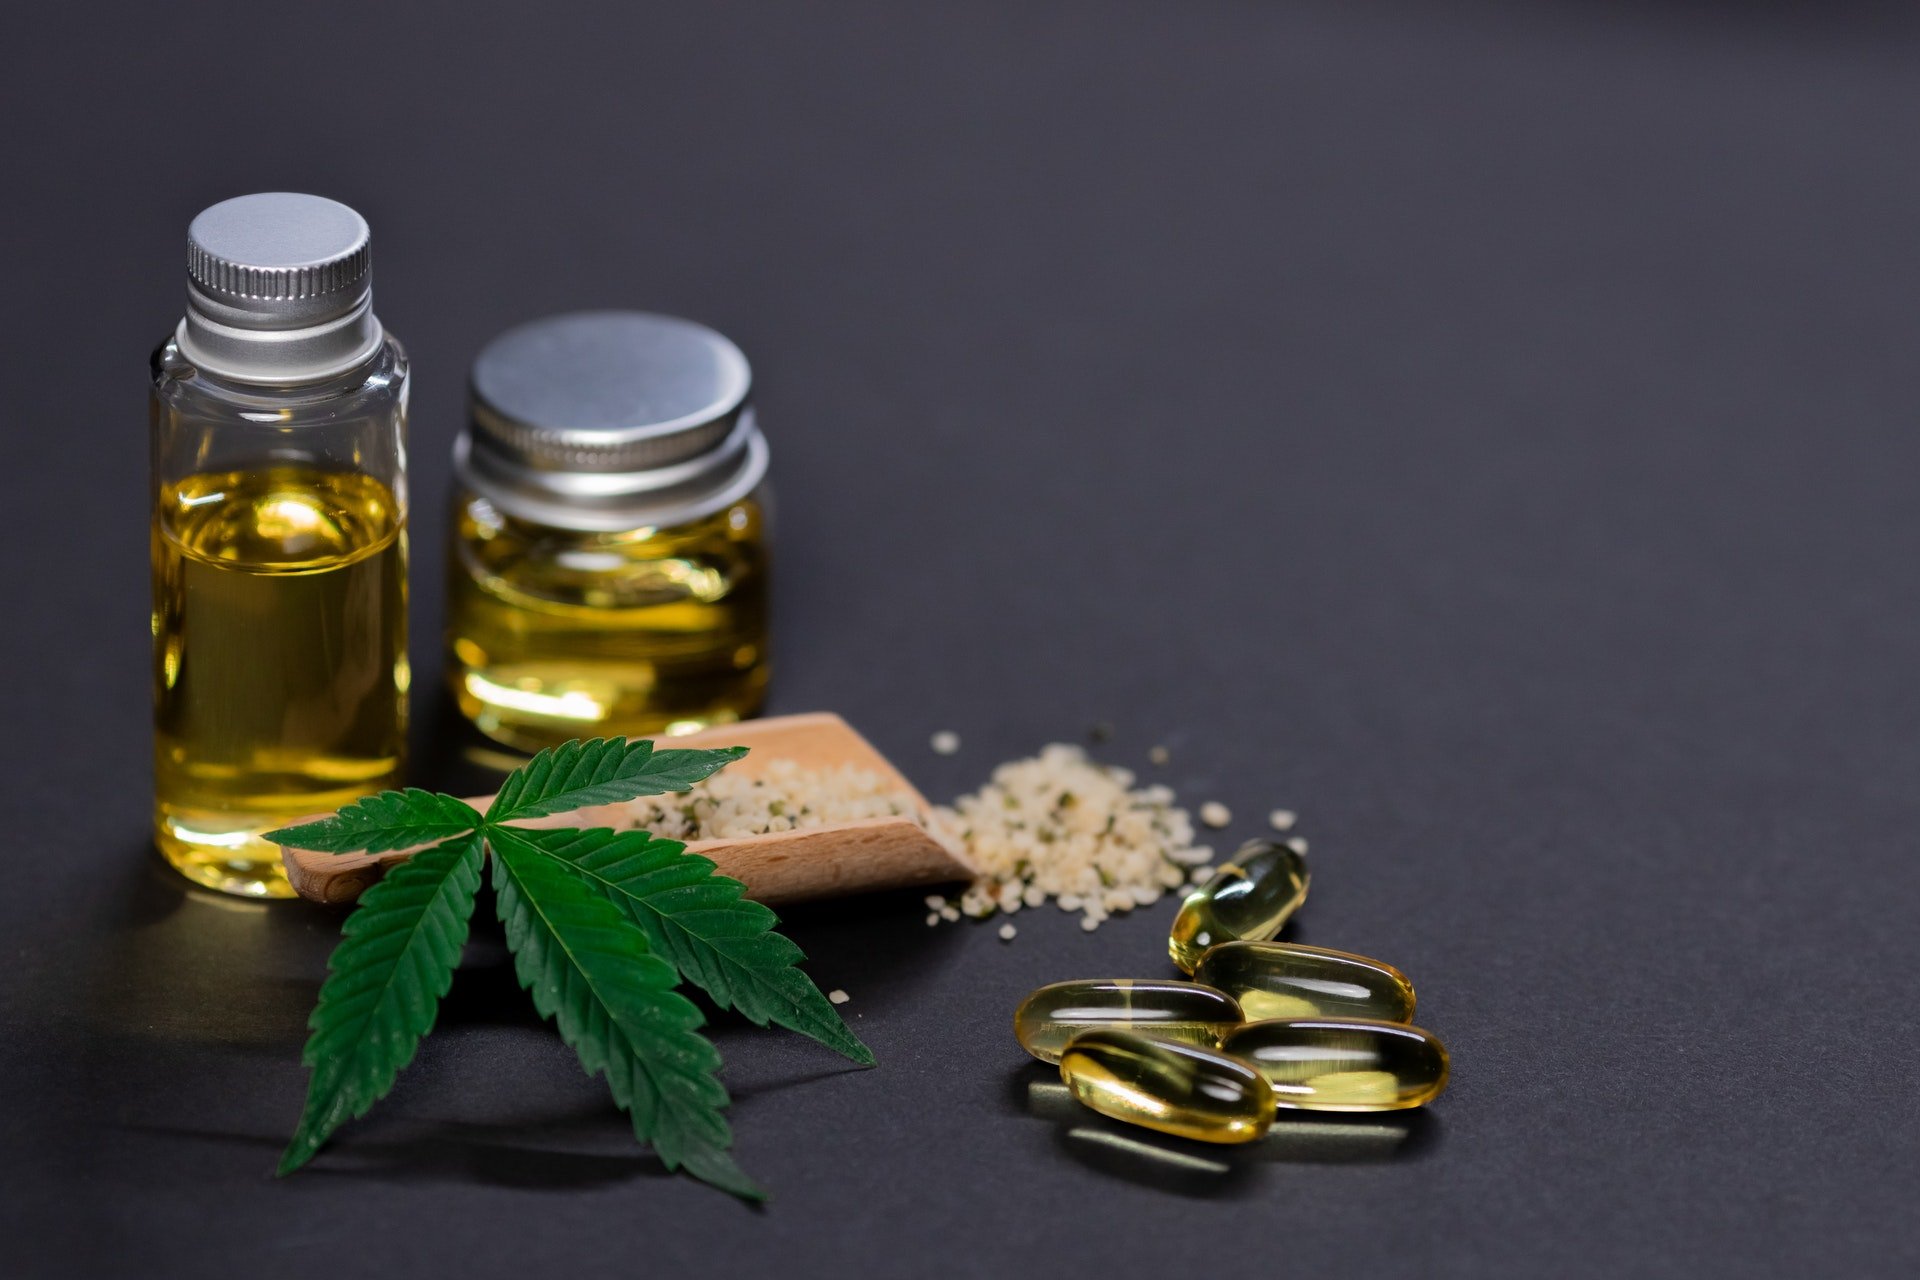 A Look at How to Use CBD Oil to Improve Your Fitness Routine